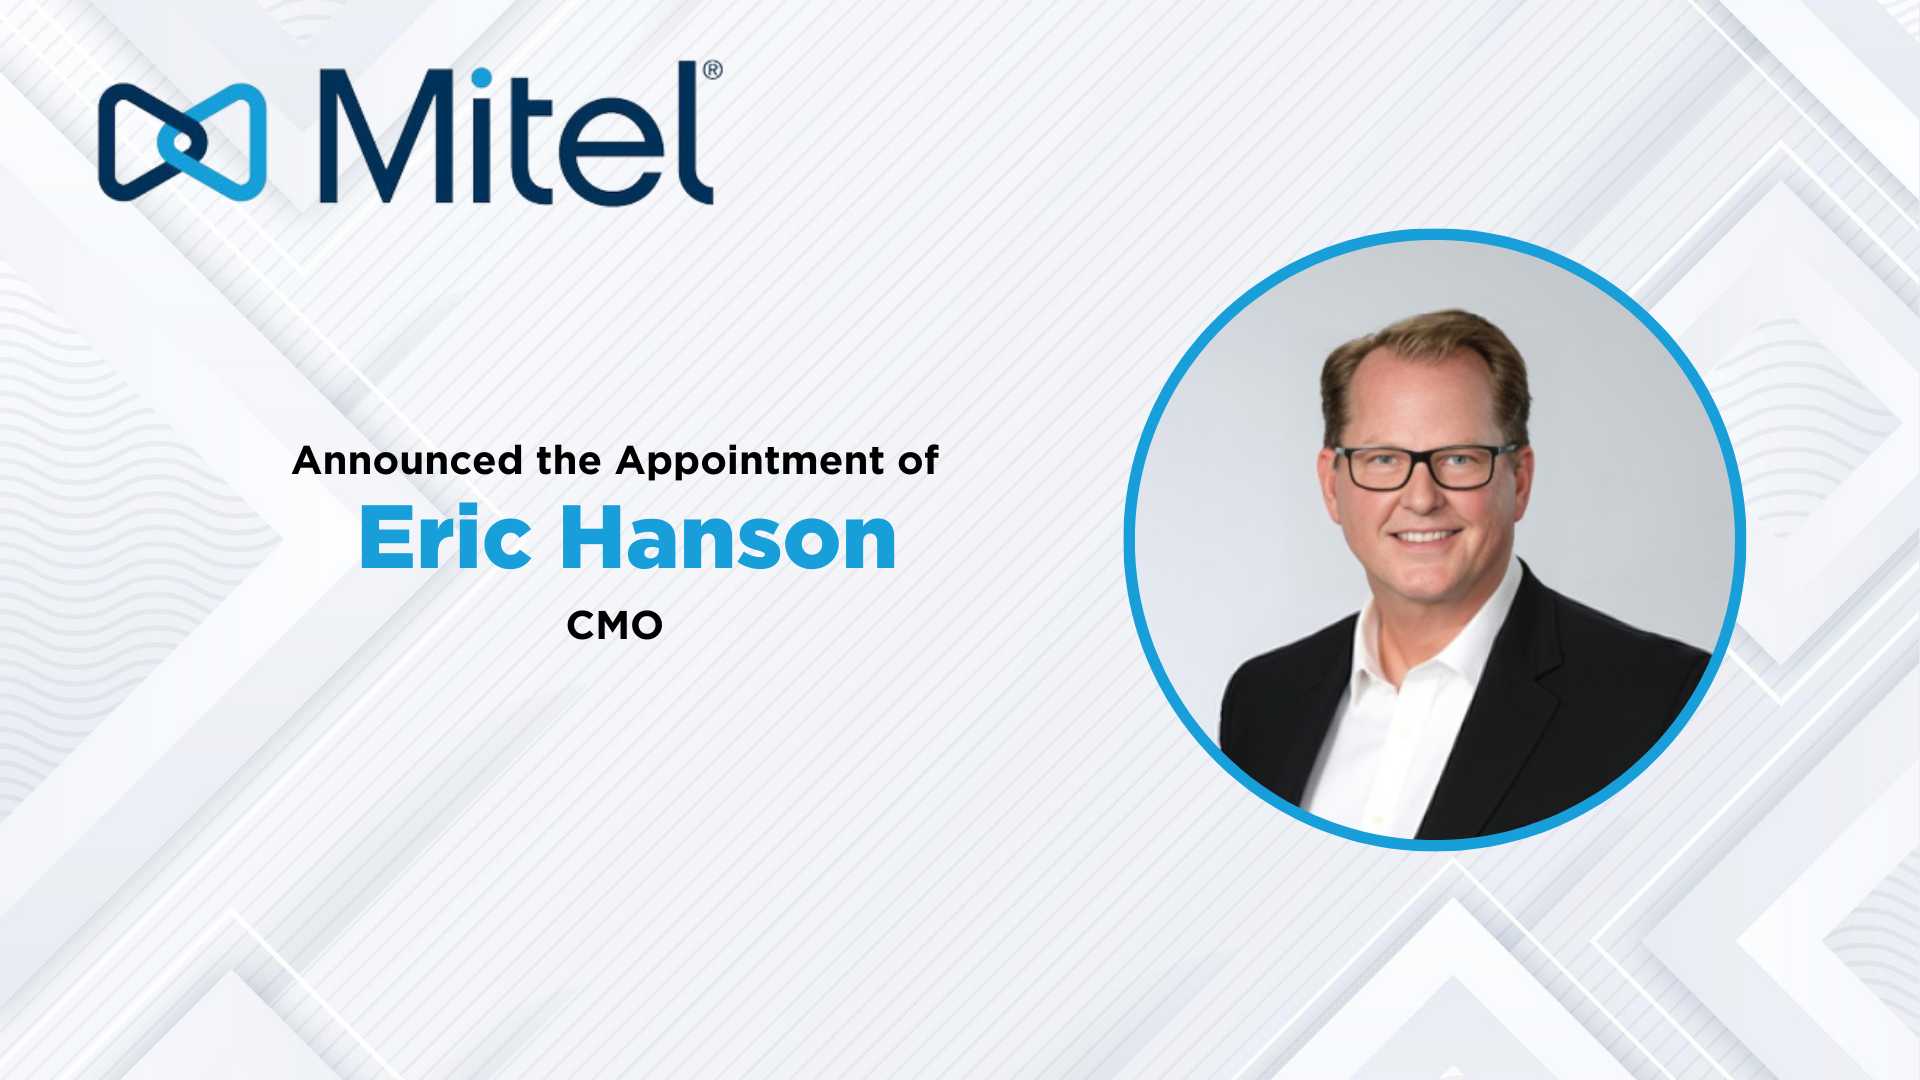 Mitel Appoints Eric Hanson as Chief Marketing Officer